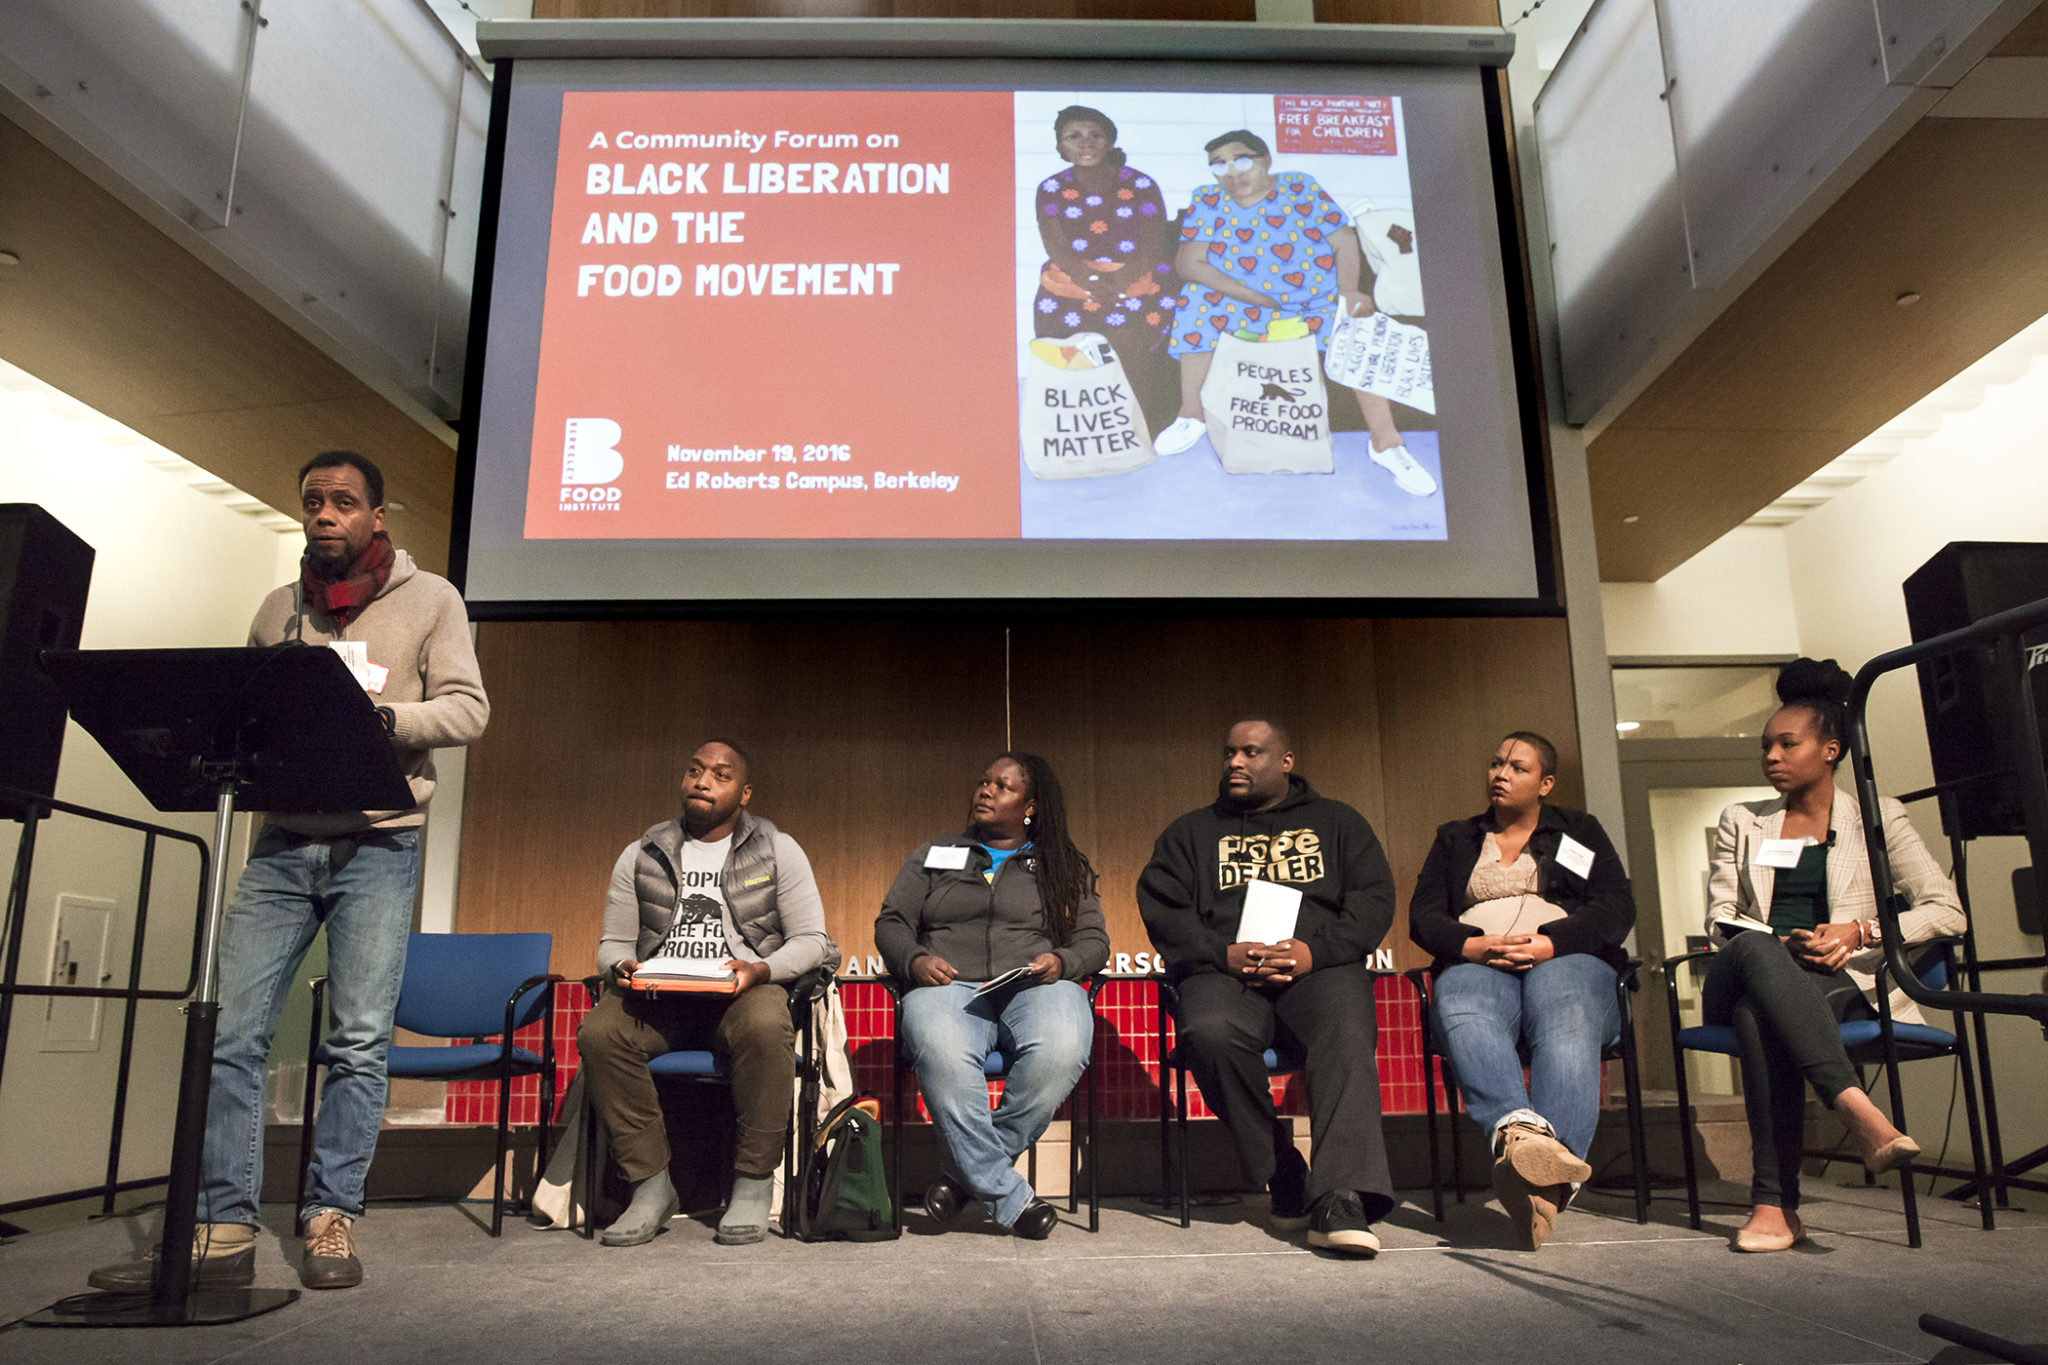 Speaker panel at the Black Liberation and the Food Movement event.